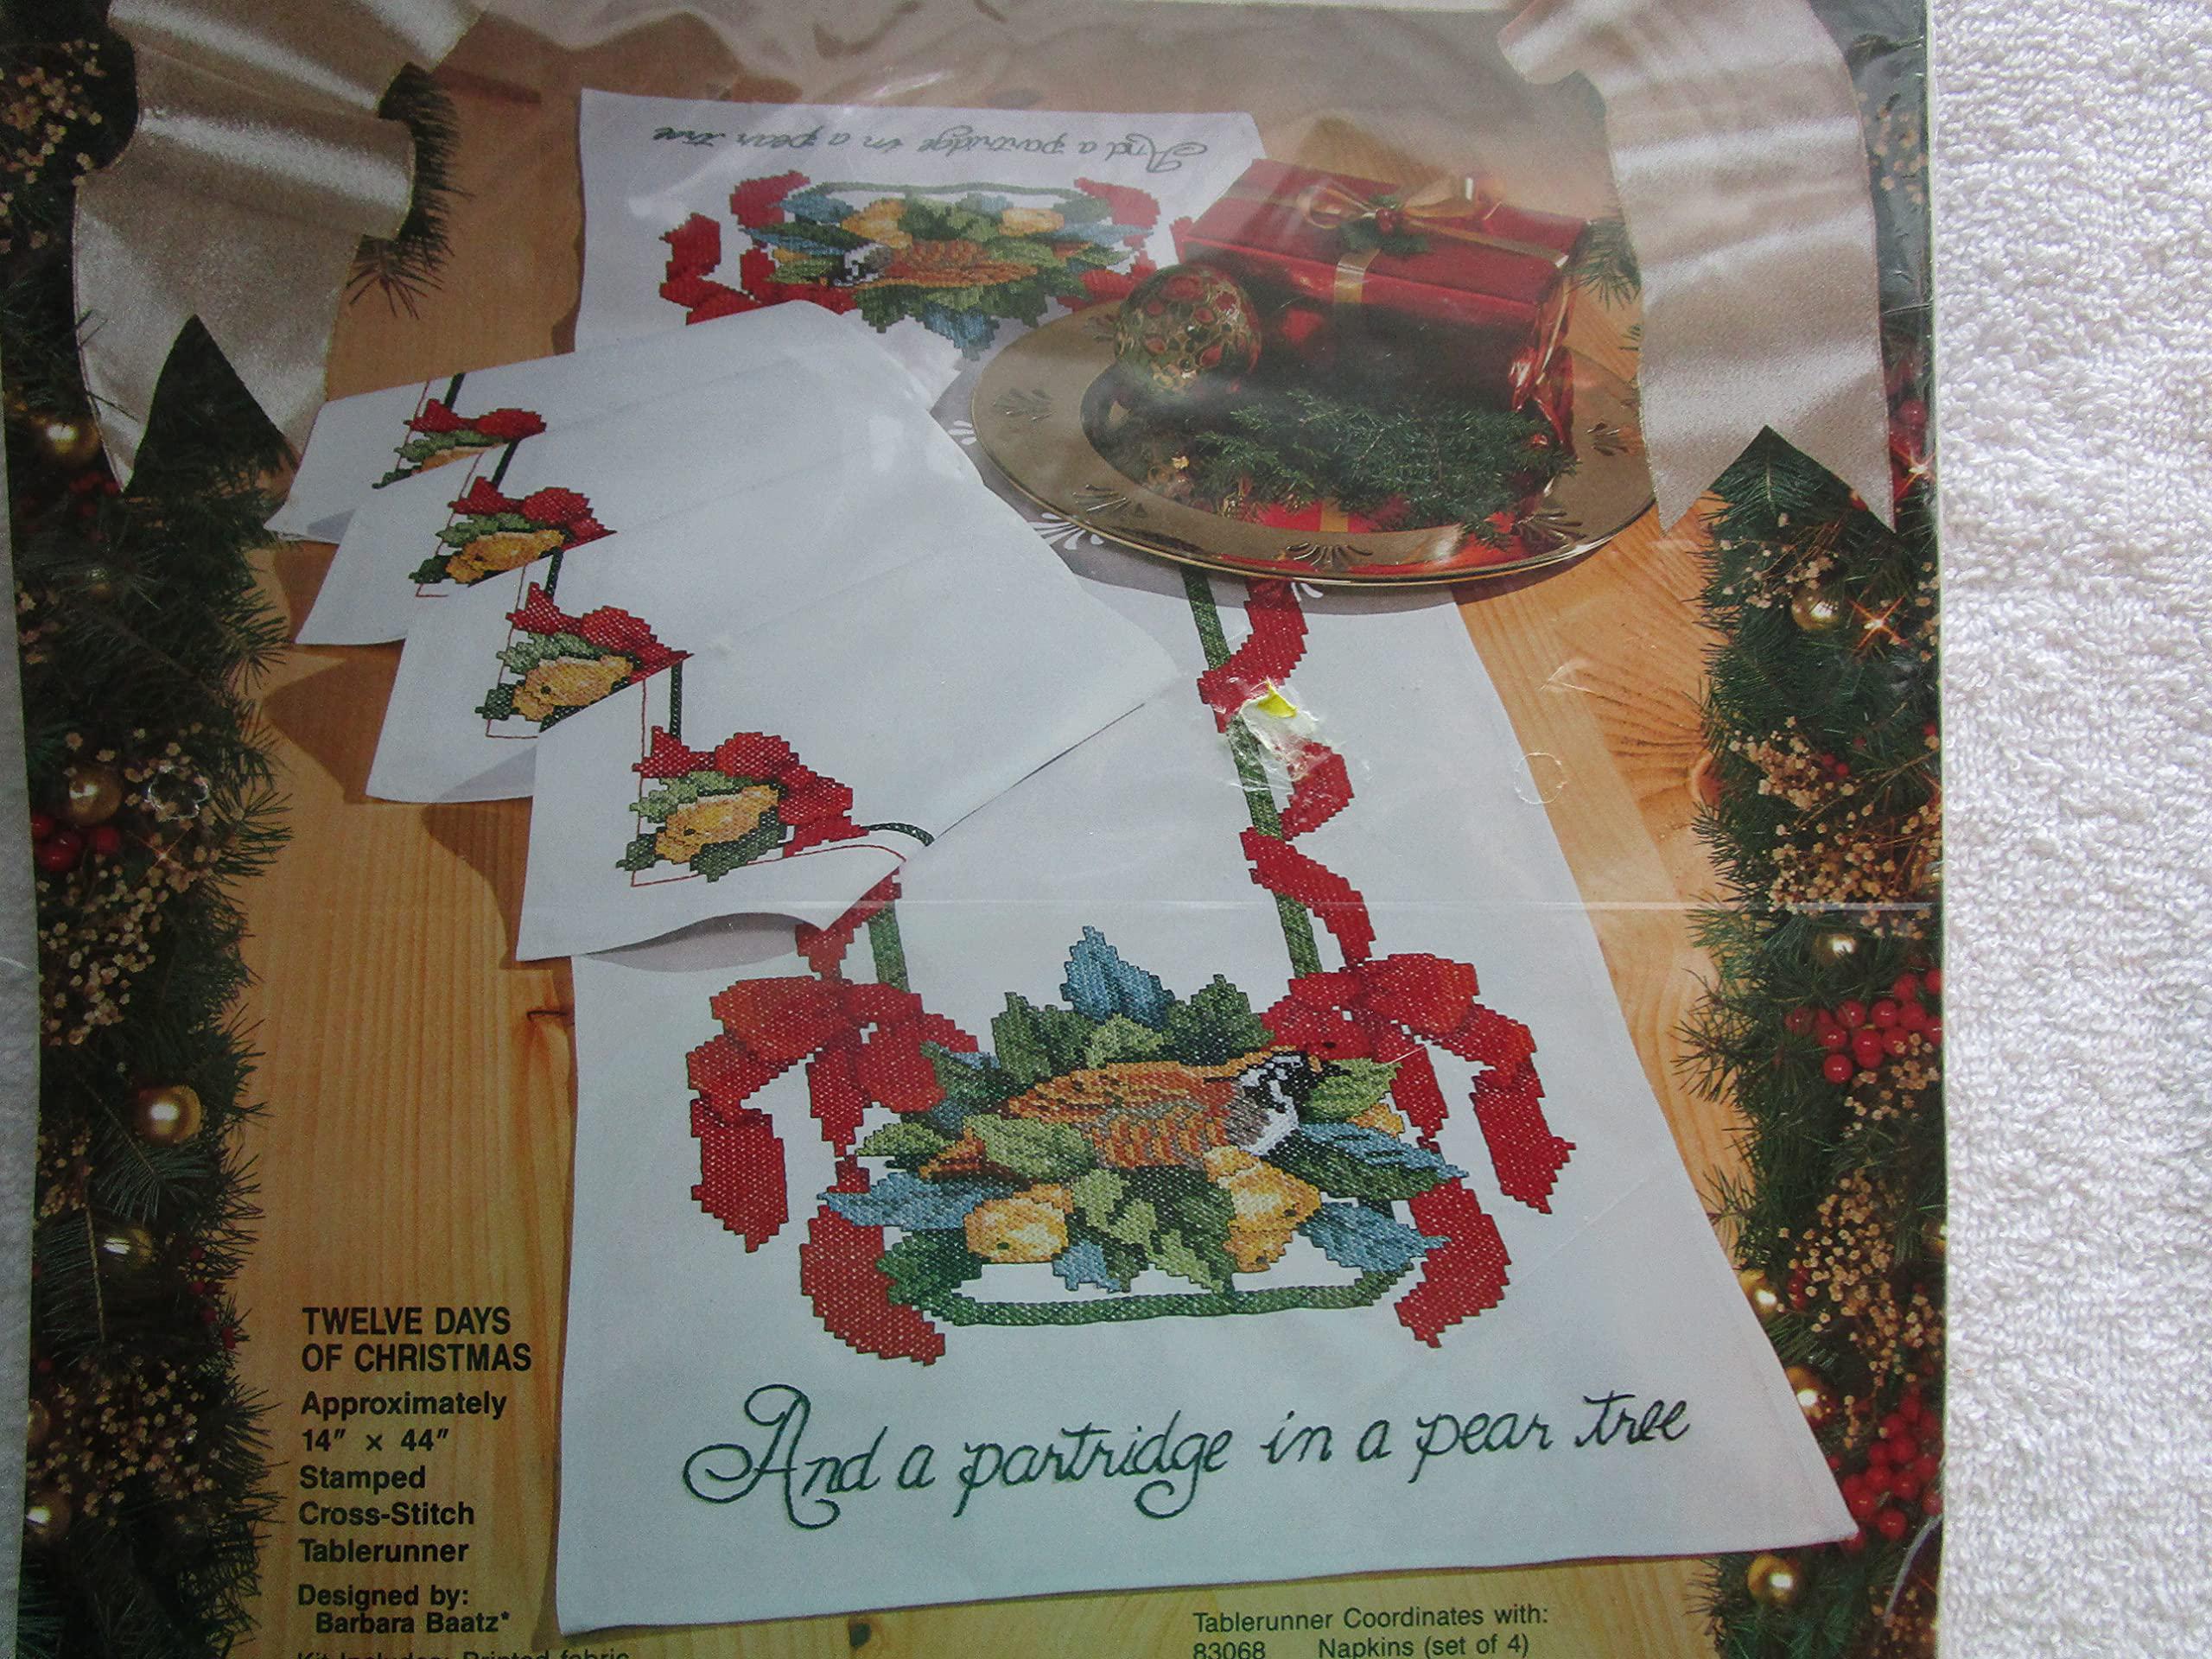 Stamped Cross Stitch twelve days of christmas (floss not included) stamped cross stitch tablerunner kit